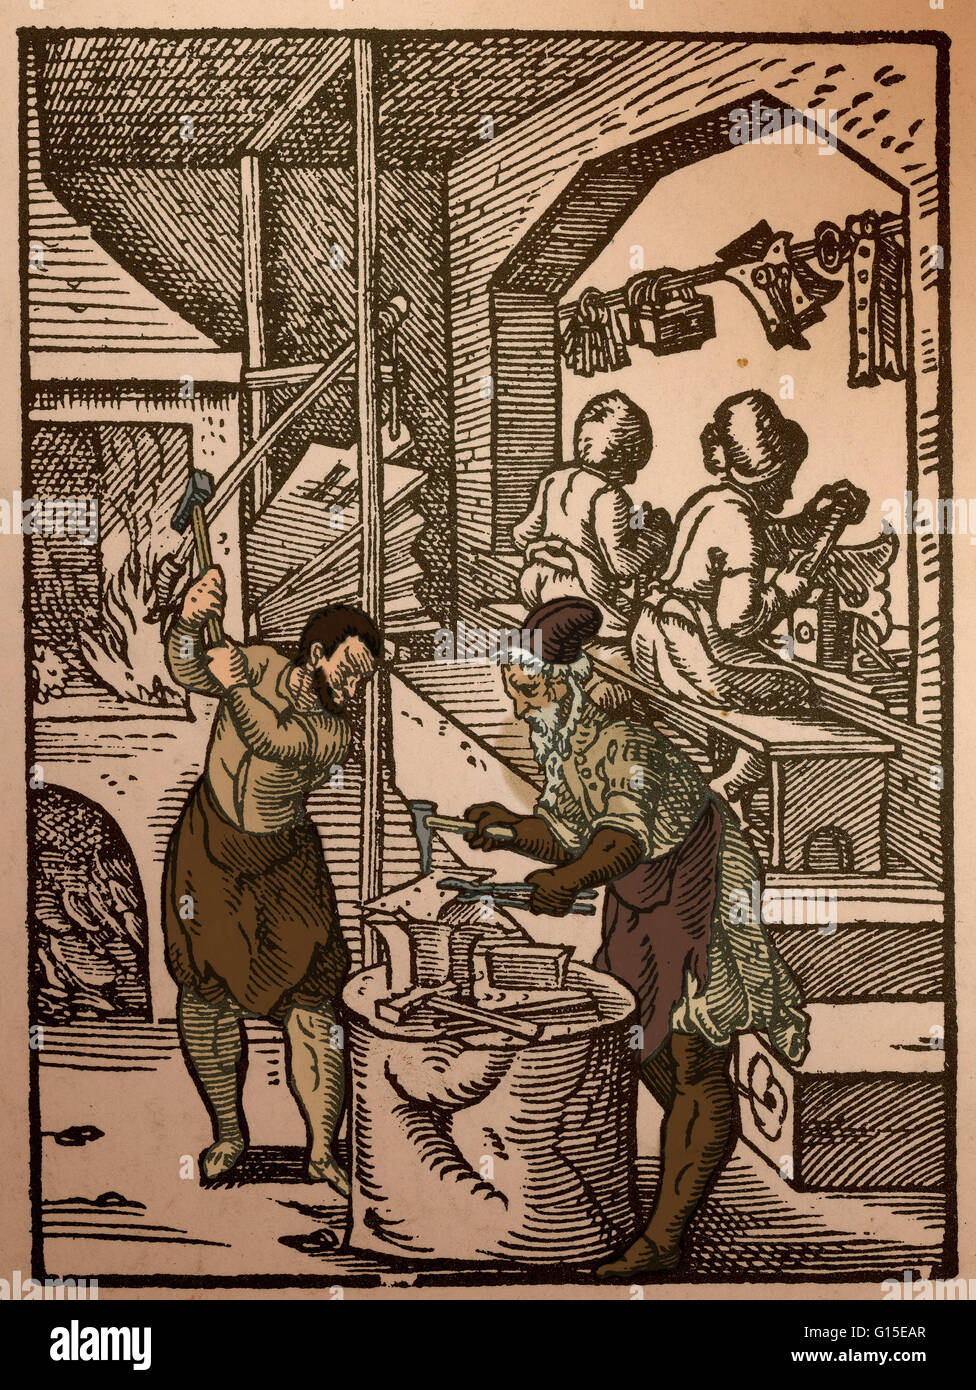 The Locksmith. Woodcut reproduced from Jost Amman's 'Eygentliche Beschreibung aller Stande auff Erden', or 'Exact Description of all Ranks on Earth'. Frankfurt, 1568. Amman documented contemporary life in the 1500s. His book is known as the Ständebuch (Bo Stock Photo